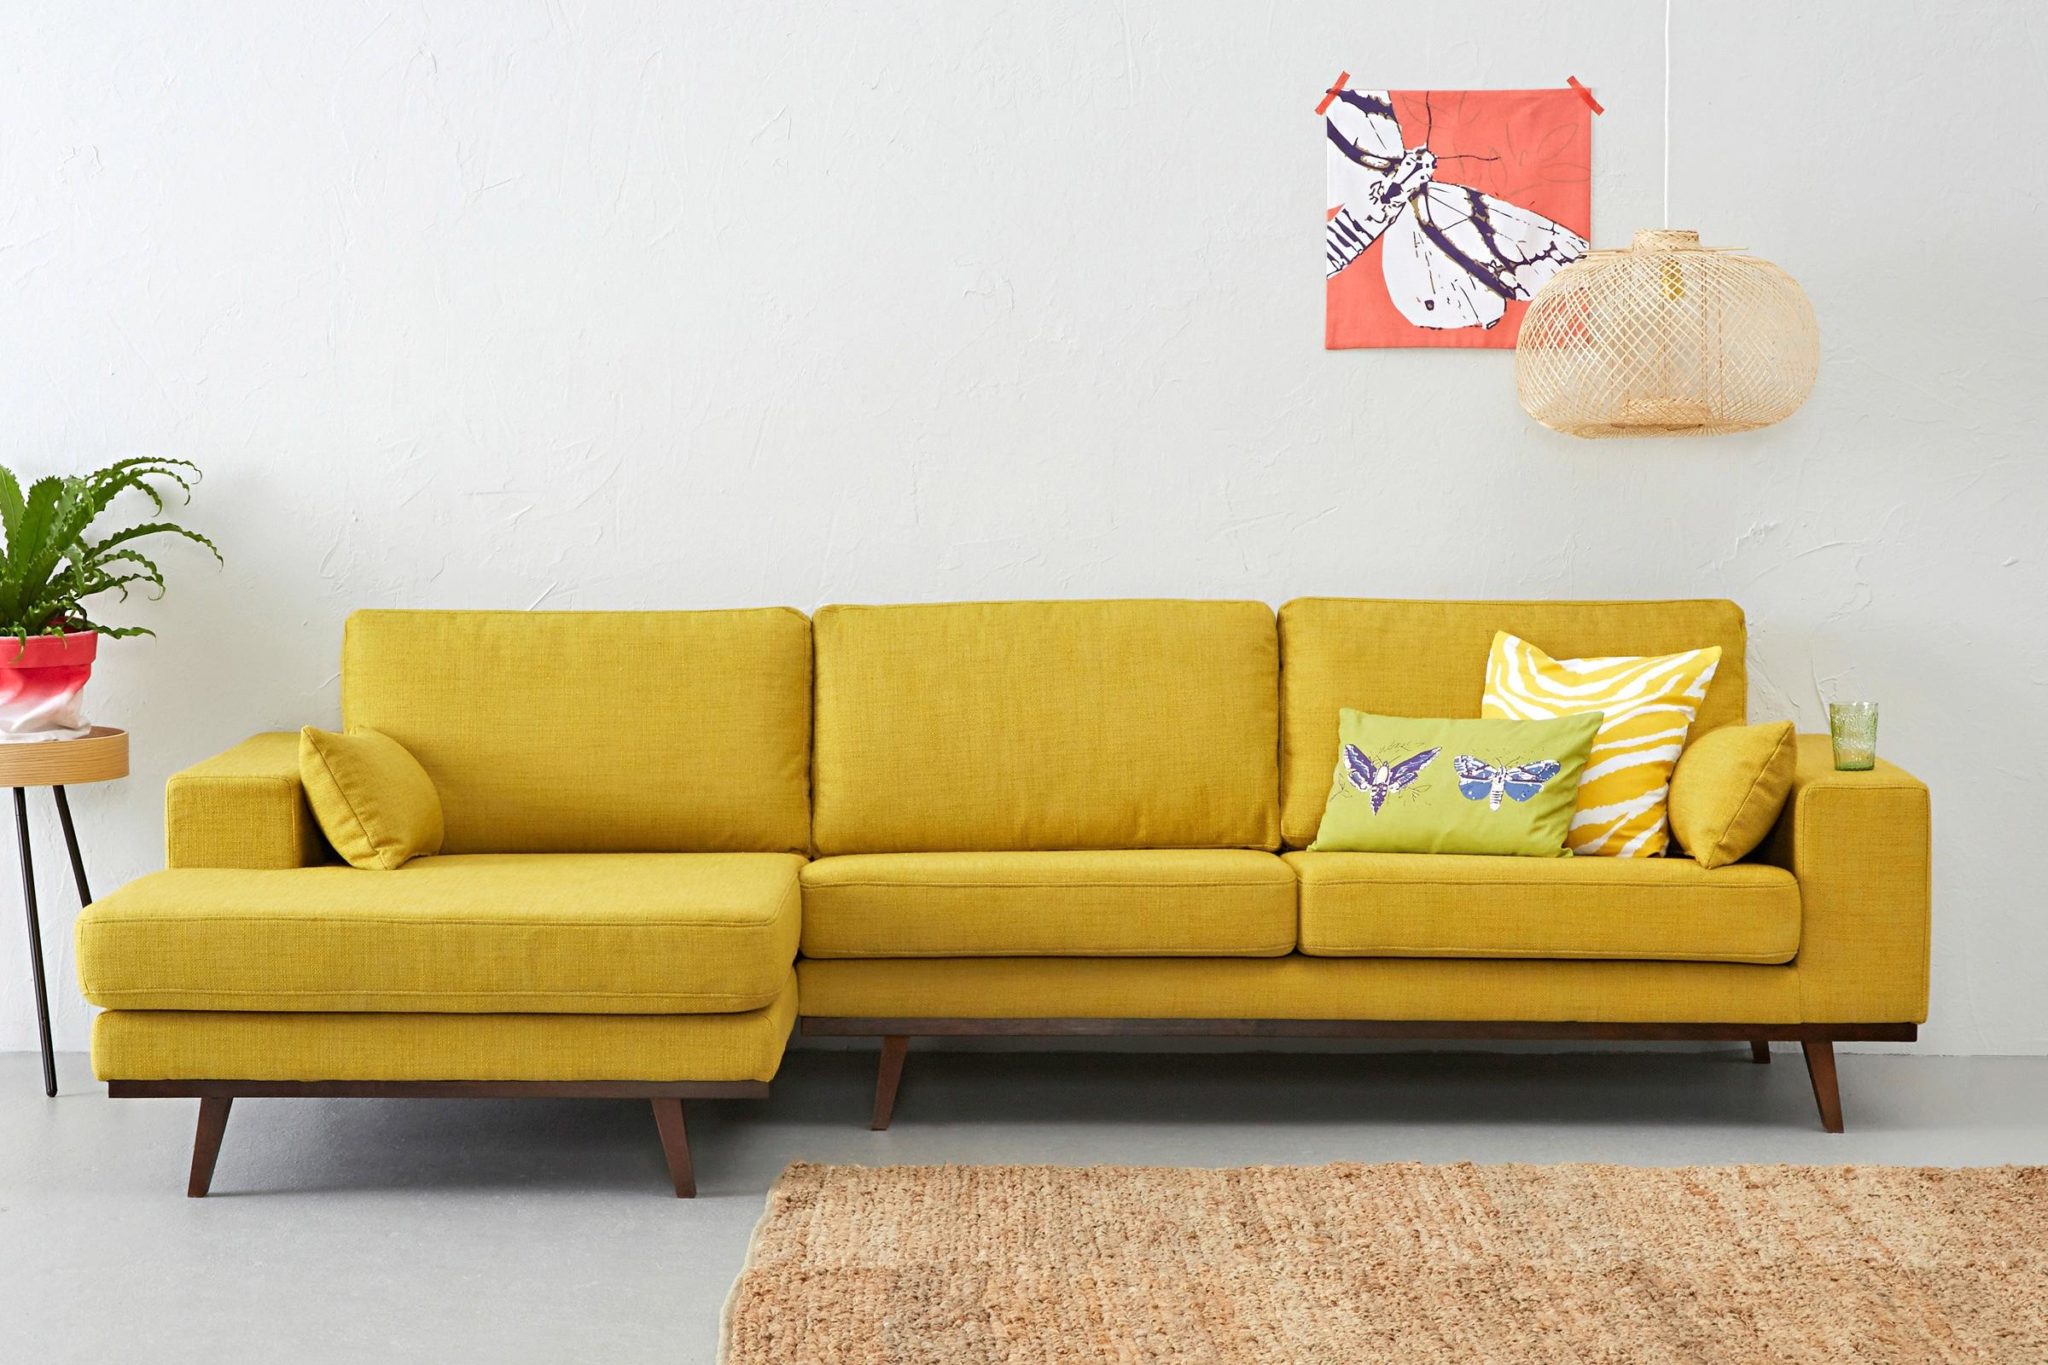 New Yellow Living Room Furniture for Simple Design